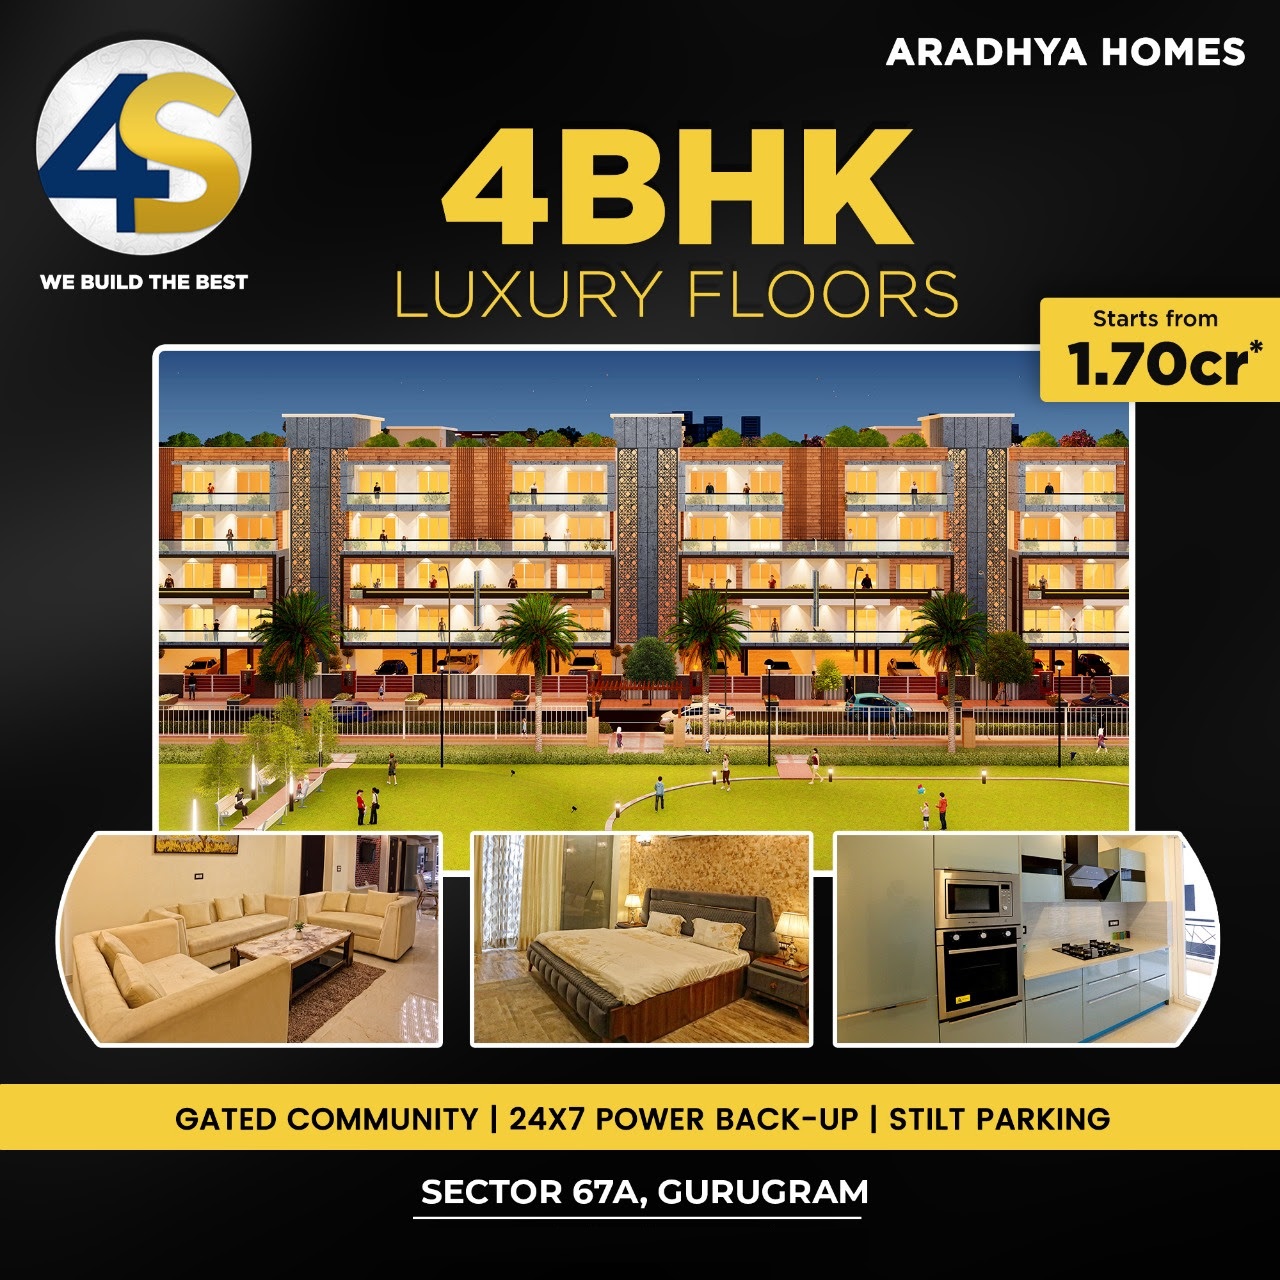 Book 4 BHK luxury floors price starting Rs 1.70 Cr at Aradhya Homes in Sector 67A, Gurgaon